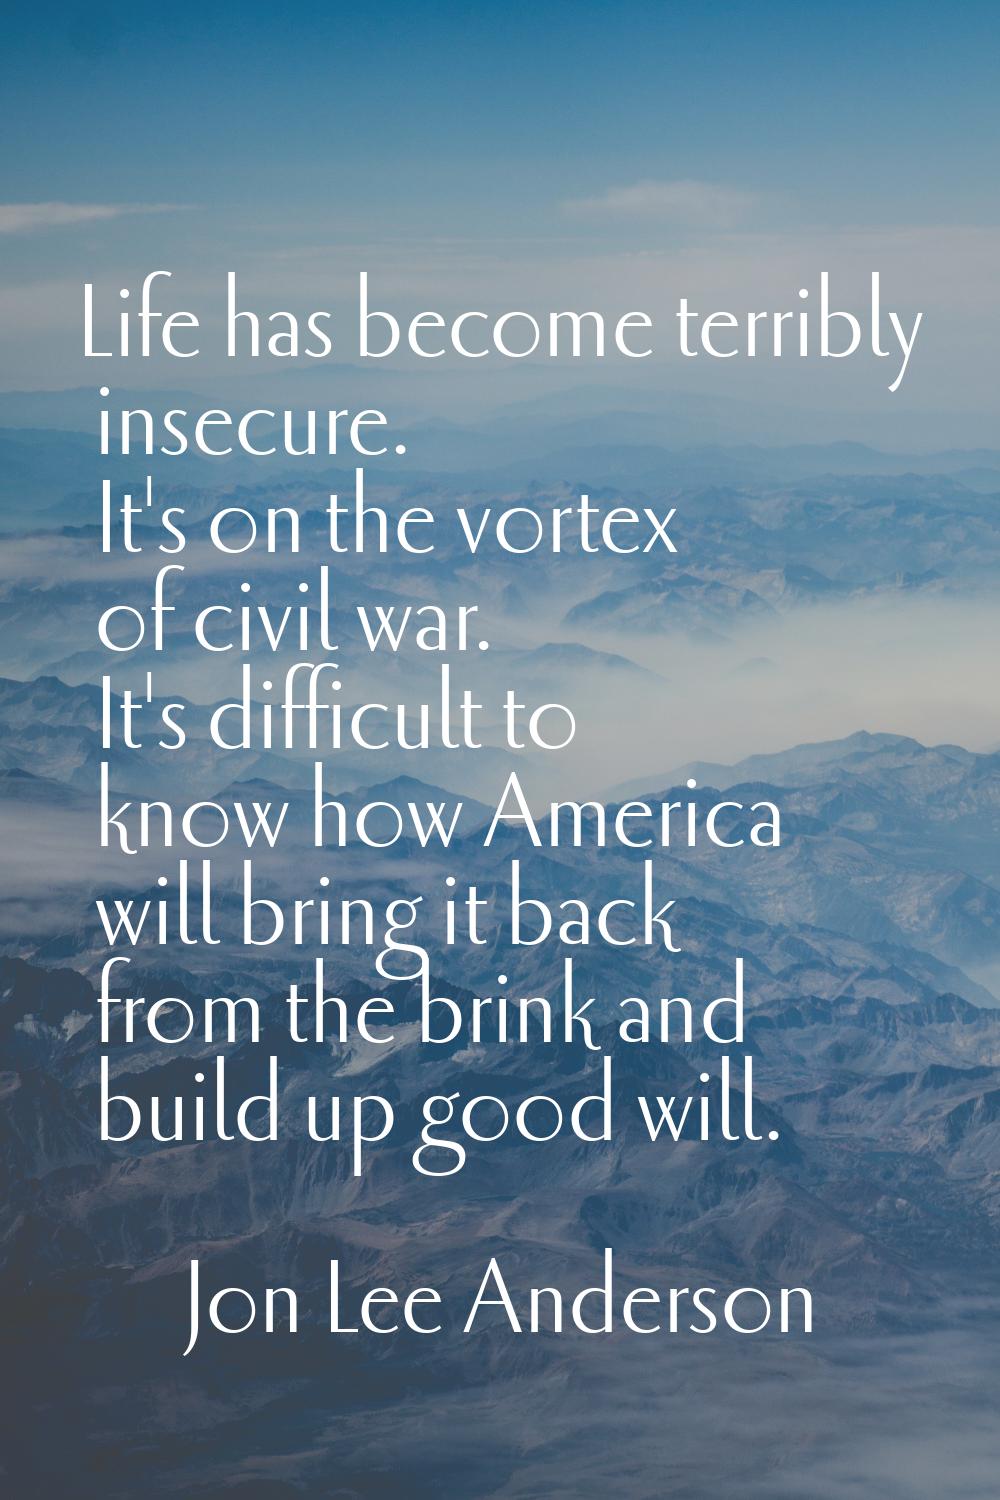 Life has become terribly insecure. It's on the vortex of civil war. It's difficult to know how Amer